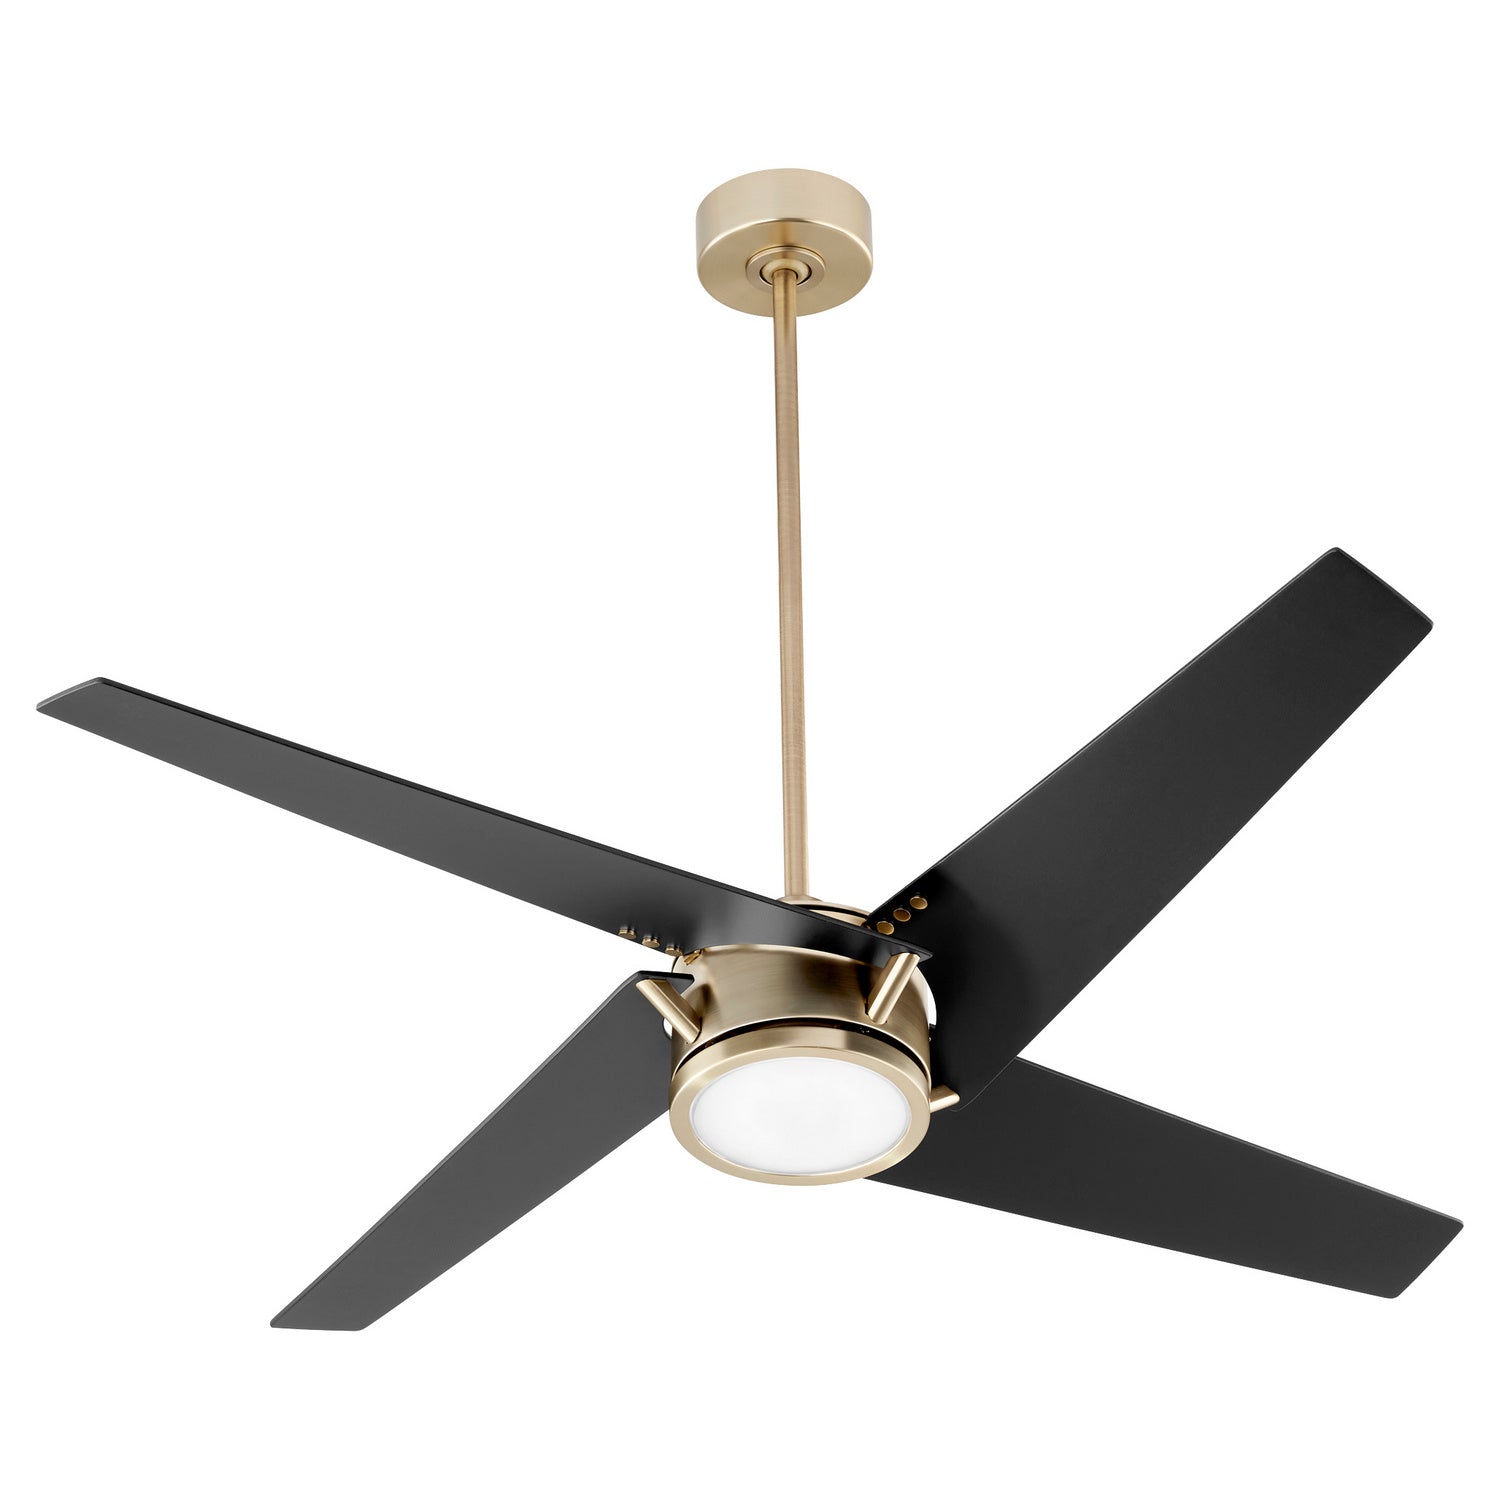 Quorum - 26544-80 - 54"Ceiling Fan - Axis - Aged Brass